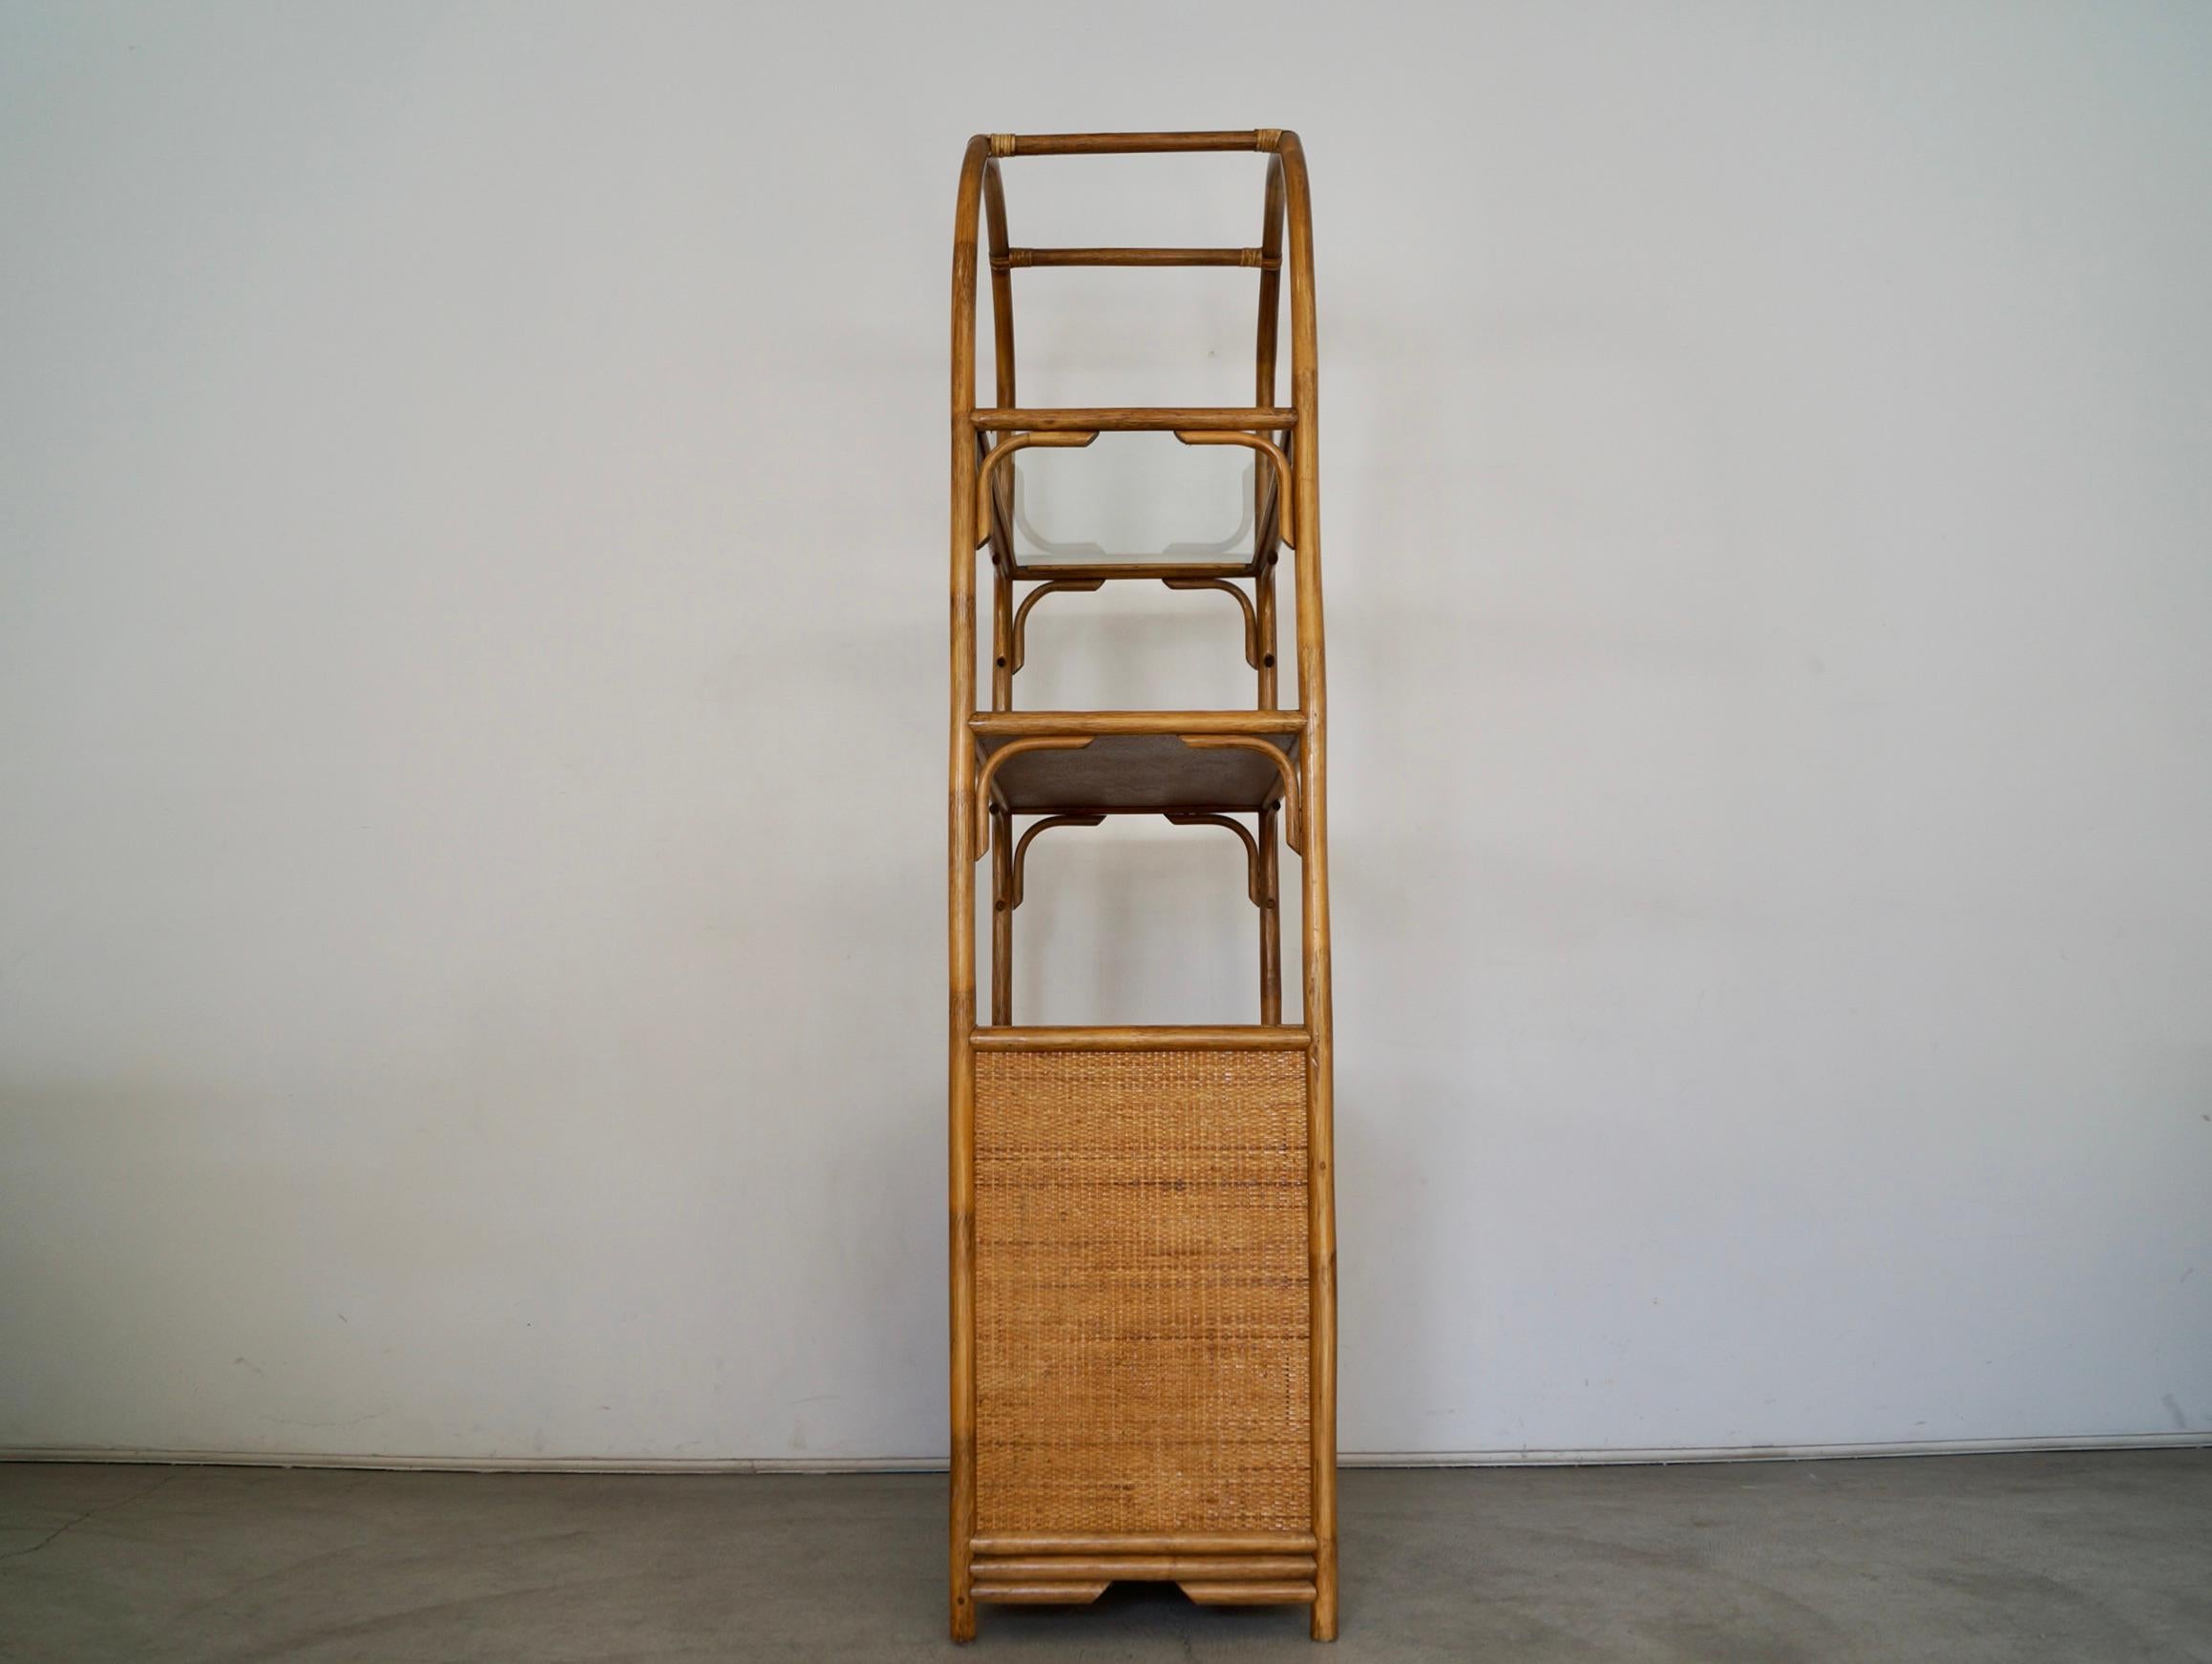 1970s Rattan Shelving Unit / Etagere  In Excellent Condition For Sale In Burbank, CA